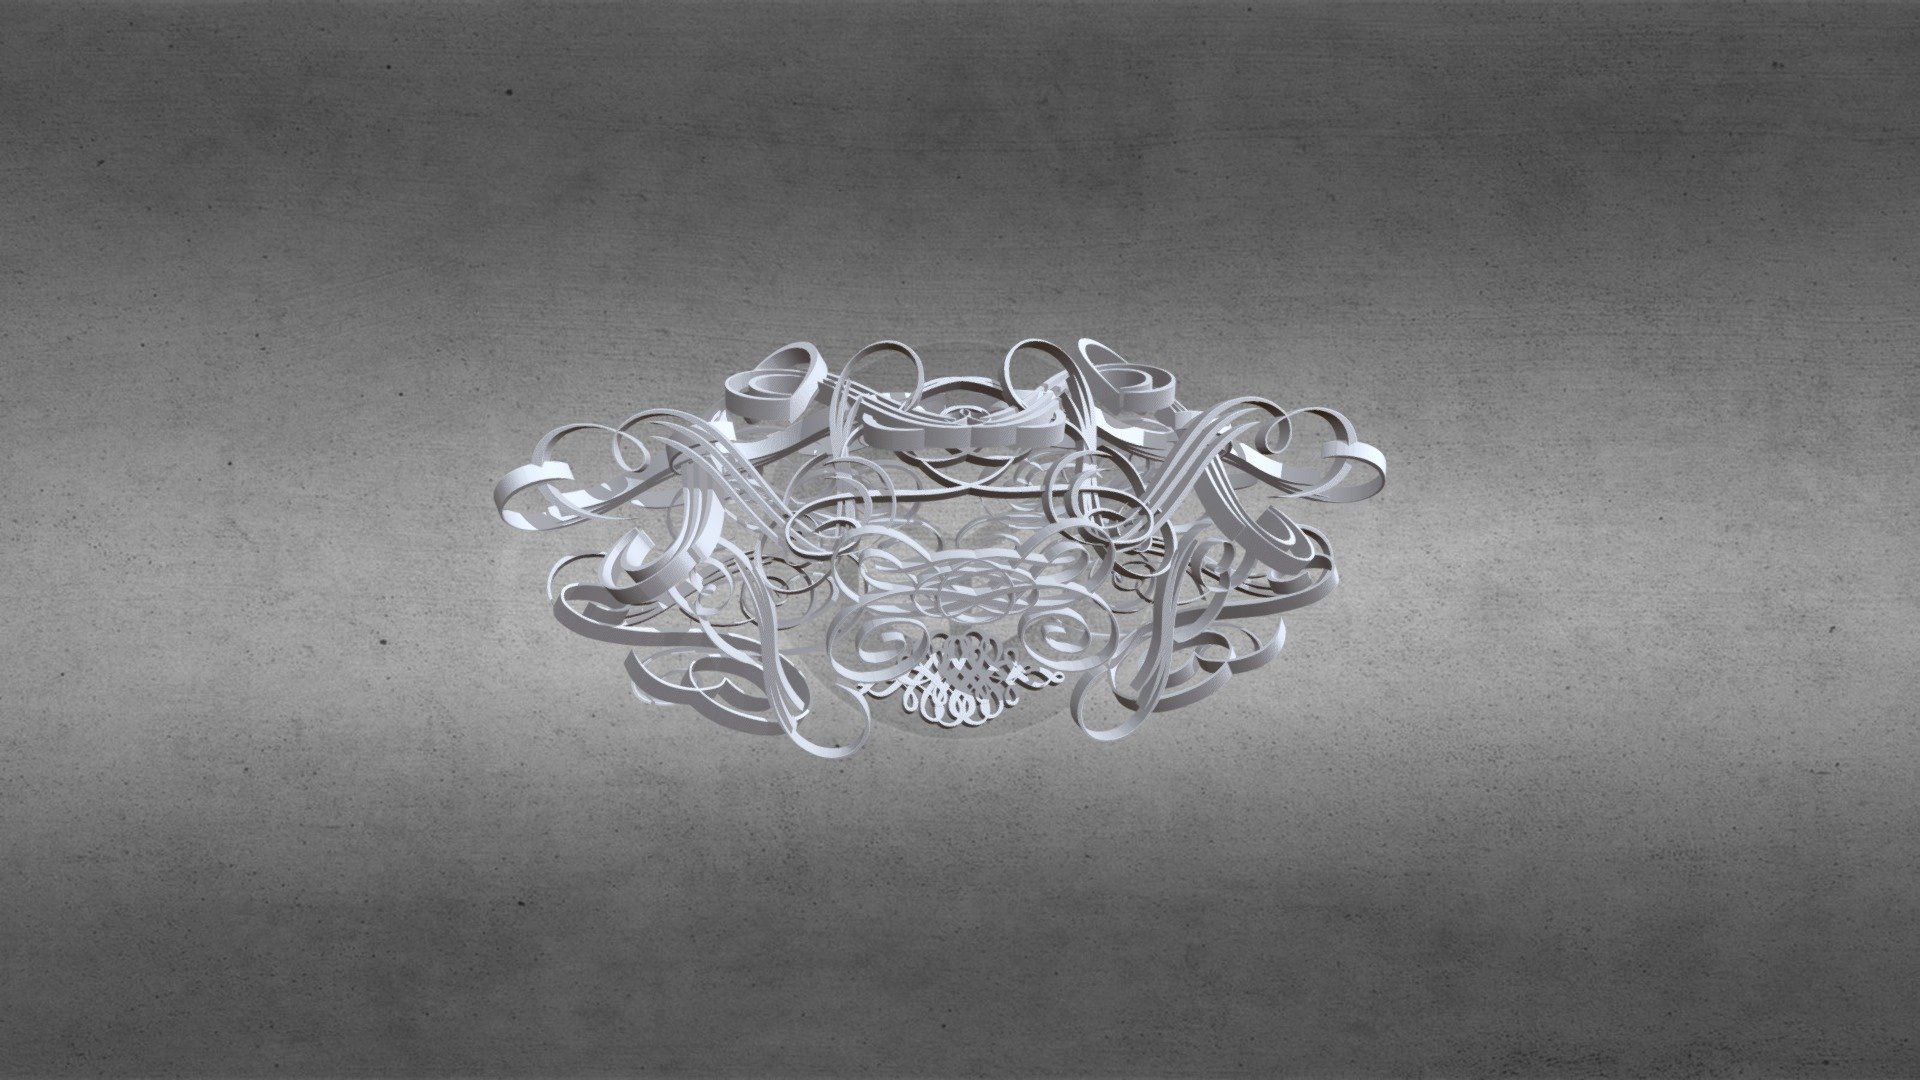 Baroque swril ornament great to add to gates or as a wedding invatation art.

Decorative Swirl, Baroque Ornament, ornamental, ornate-frame,ornate,frame-decoration,frame,gate, scrolls molding, cornice, classic, decorative,bracket,decor,carvings,architecture,3d,wall,wedding, elaborate, Calligraphic, Calligraphy, engraving - BAROQUE ORNAMENTS - Glyphs Nymph 01 - 3D model by stillpointx 3d model